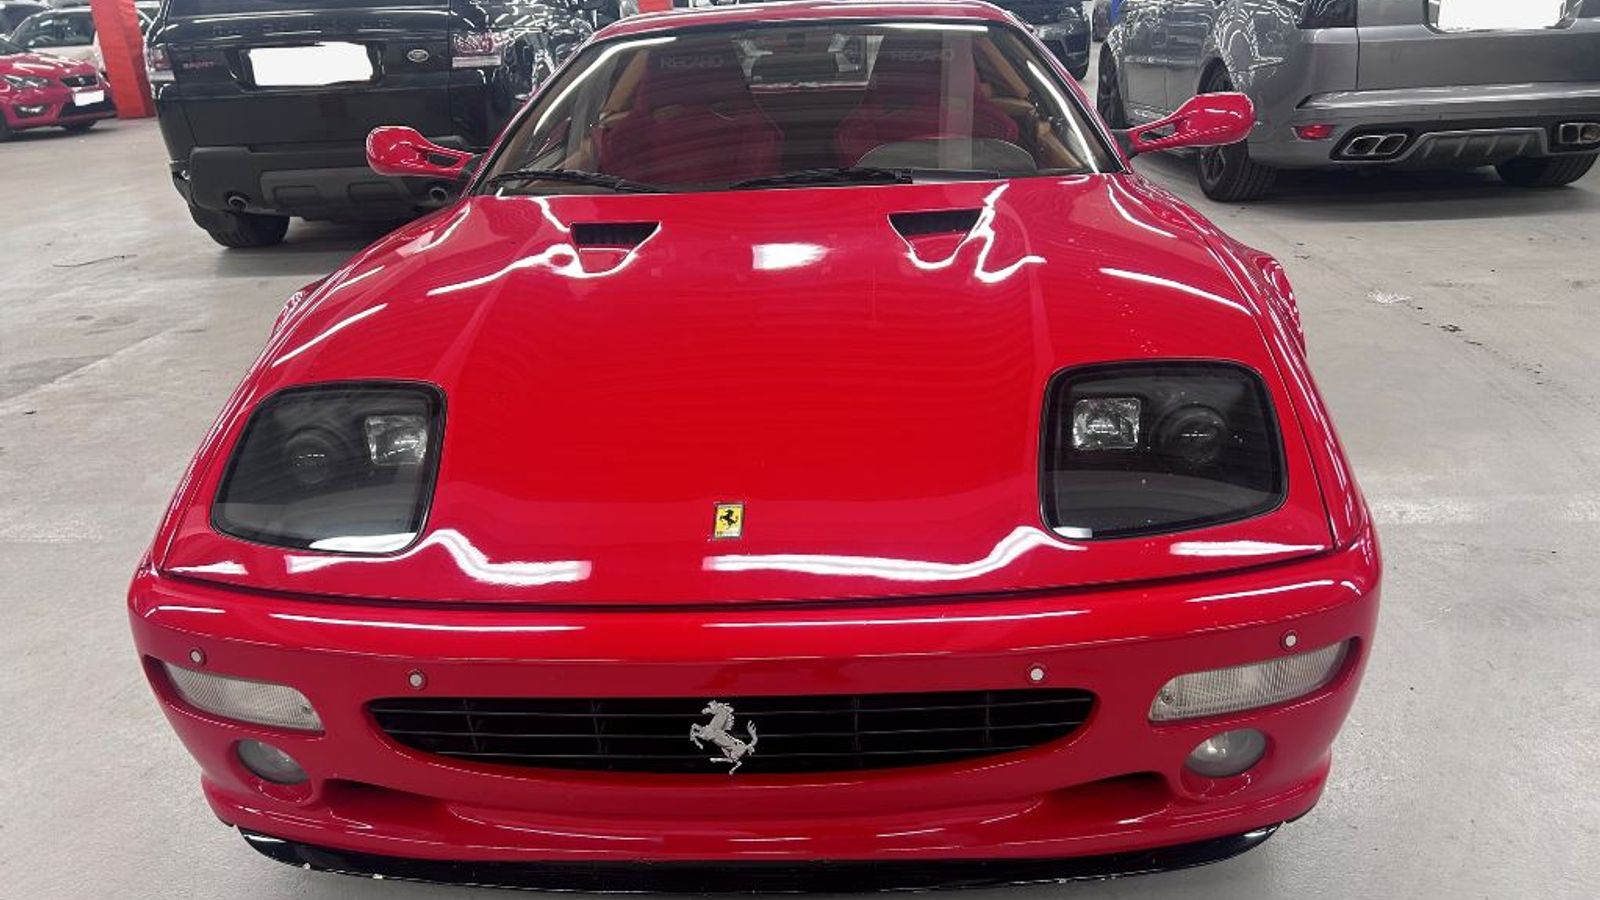 Ferrari stolen from Formula One driver Gerhard Berger in 1995 recovered by police nearly three decades later